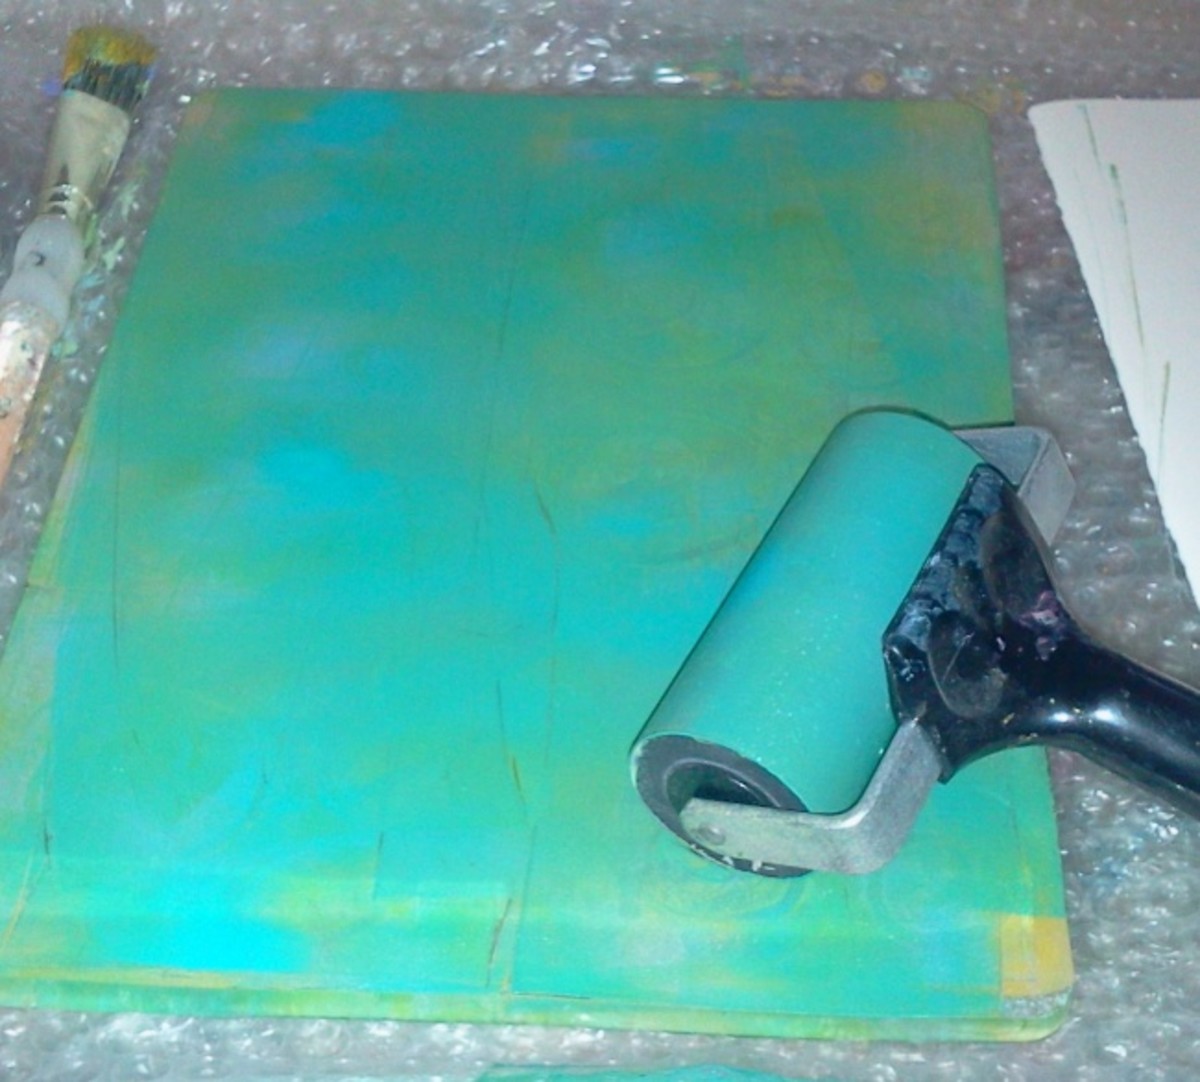 Spreading paint with a brayer.